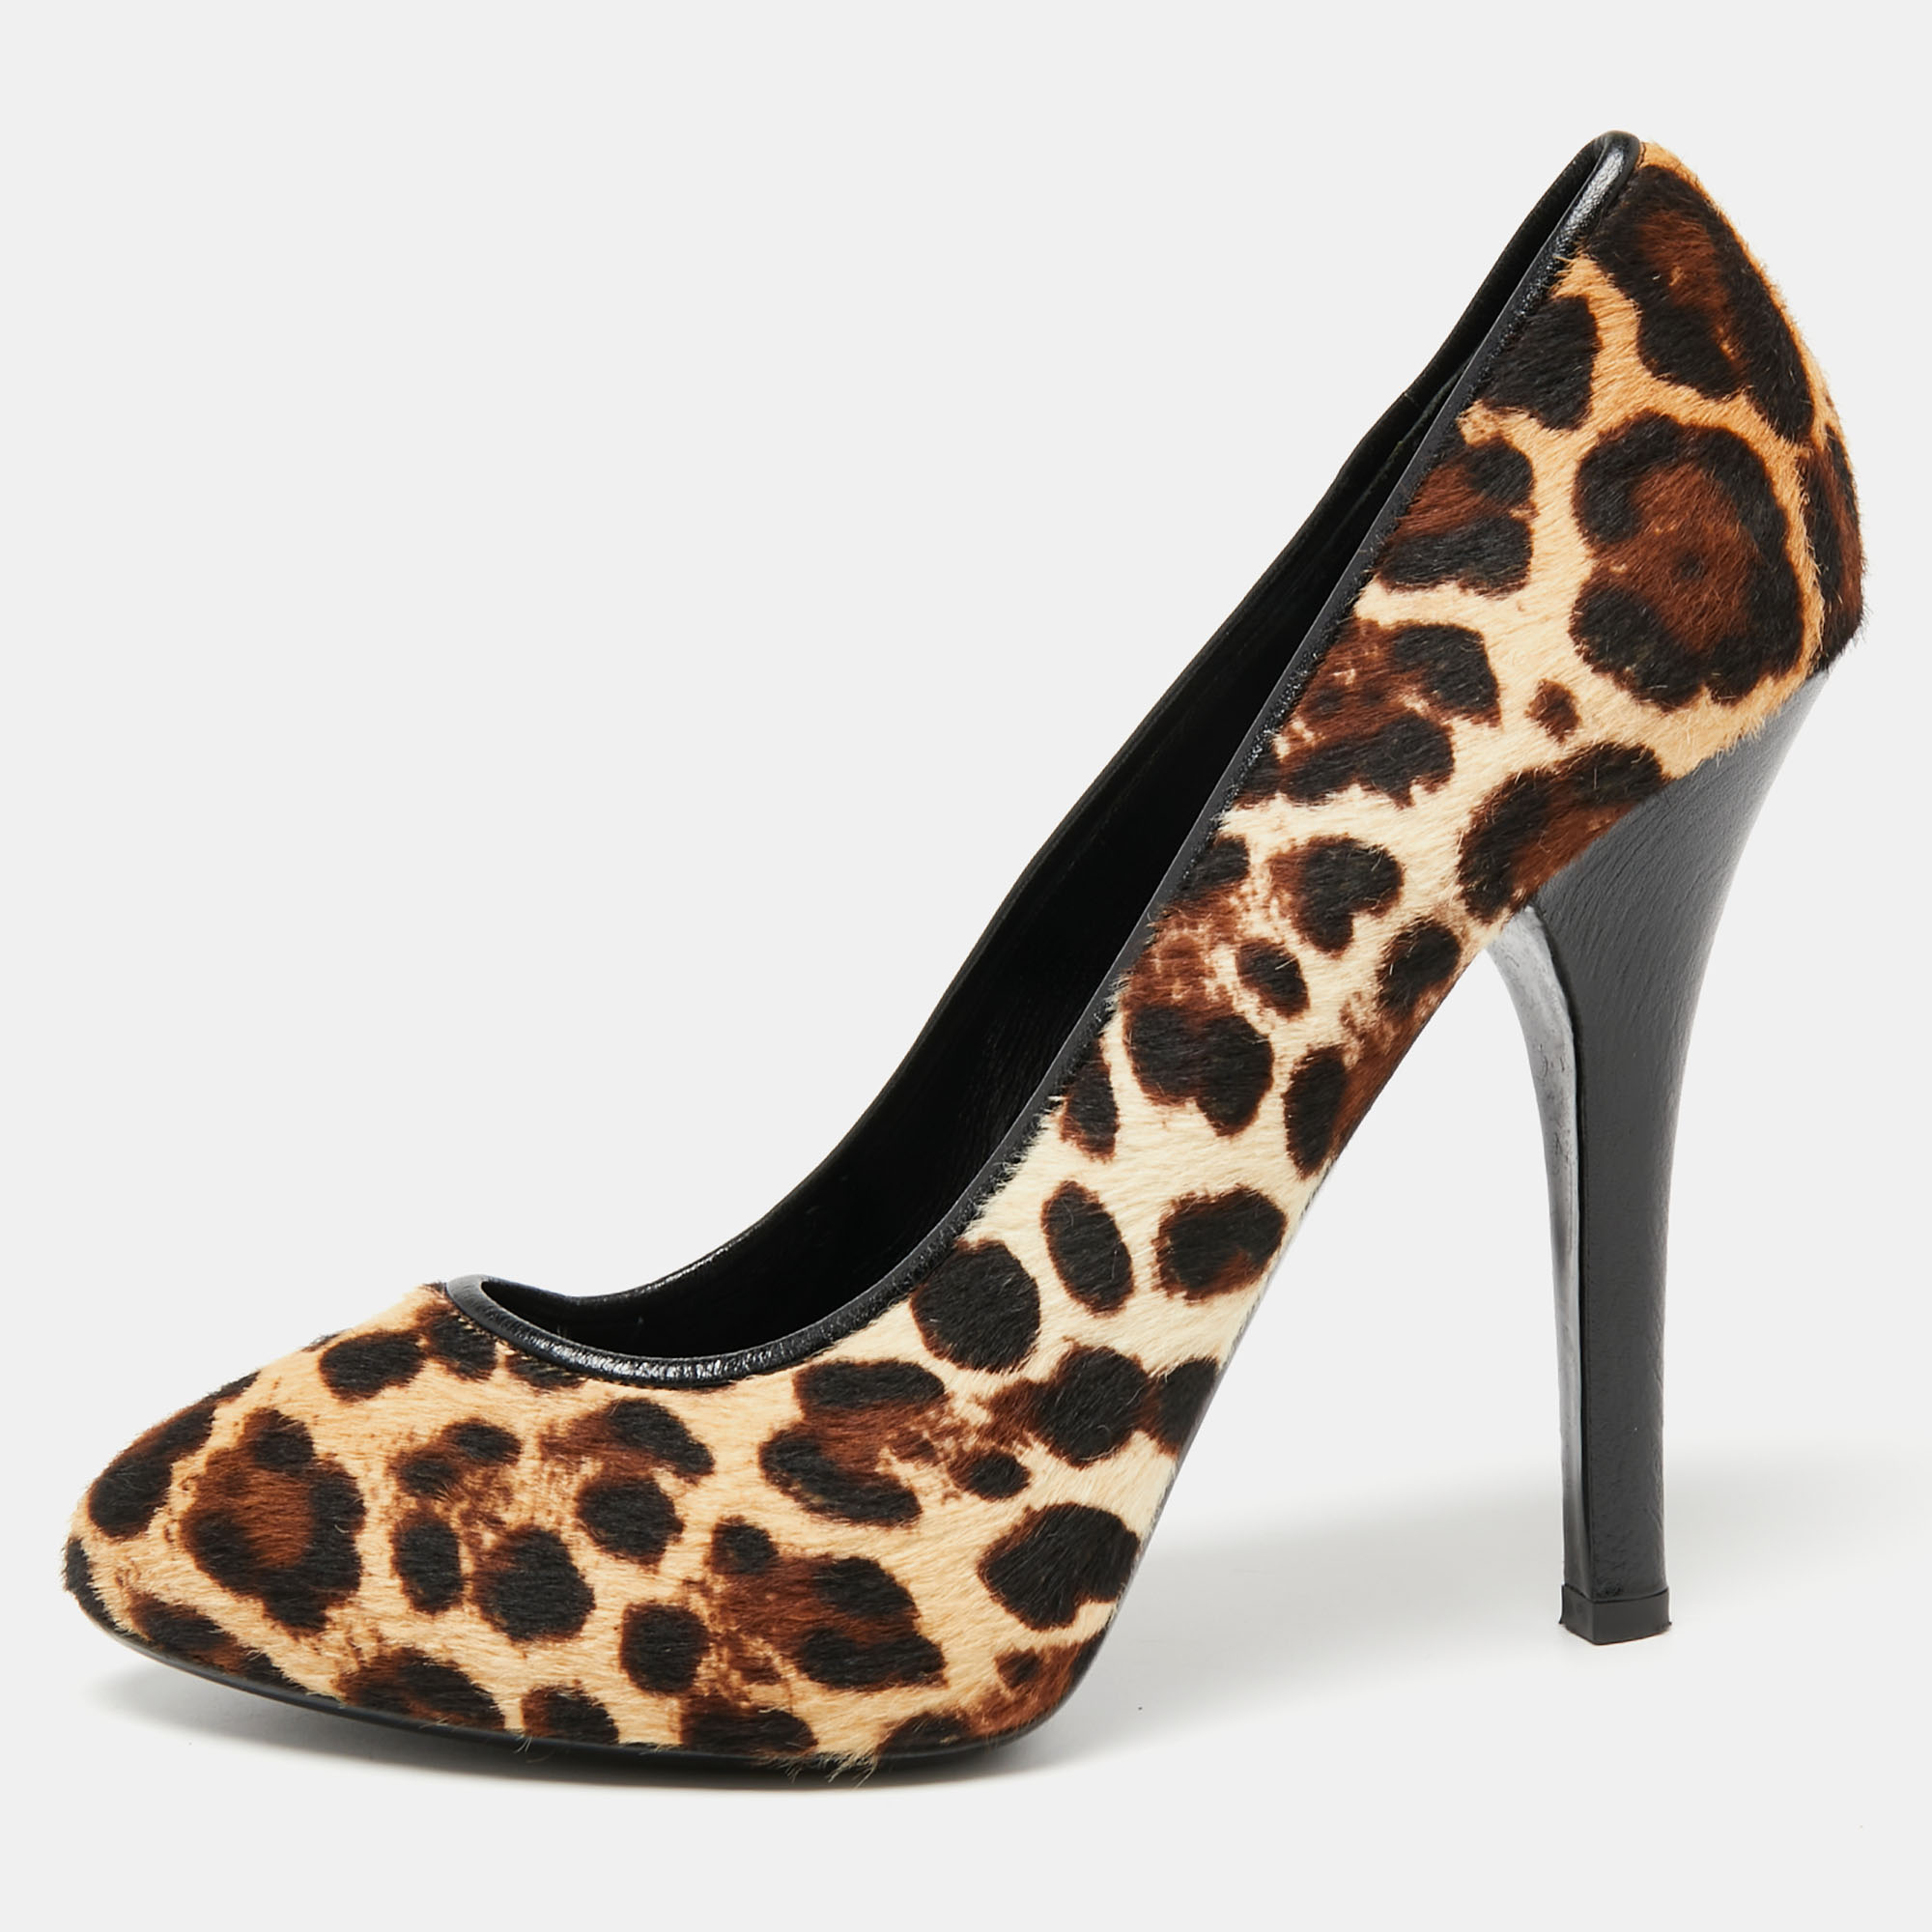 This pair of pumps designed by Dolce and Gabbana is exactly what you want. Crafted from pony hair the leopard printed exterior and high stiletto heels offer a high fashion look. They have comfortable insoles and almond toes. Add a touch of bold style to your outfit by slipping into these exquisite pumps